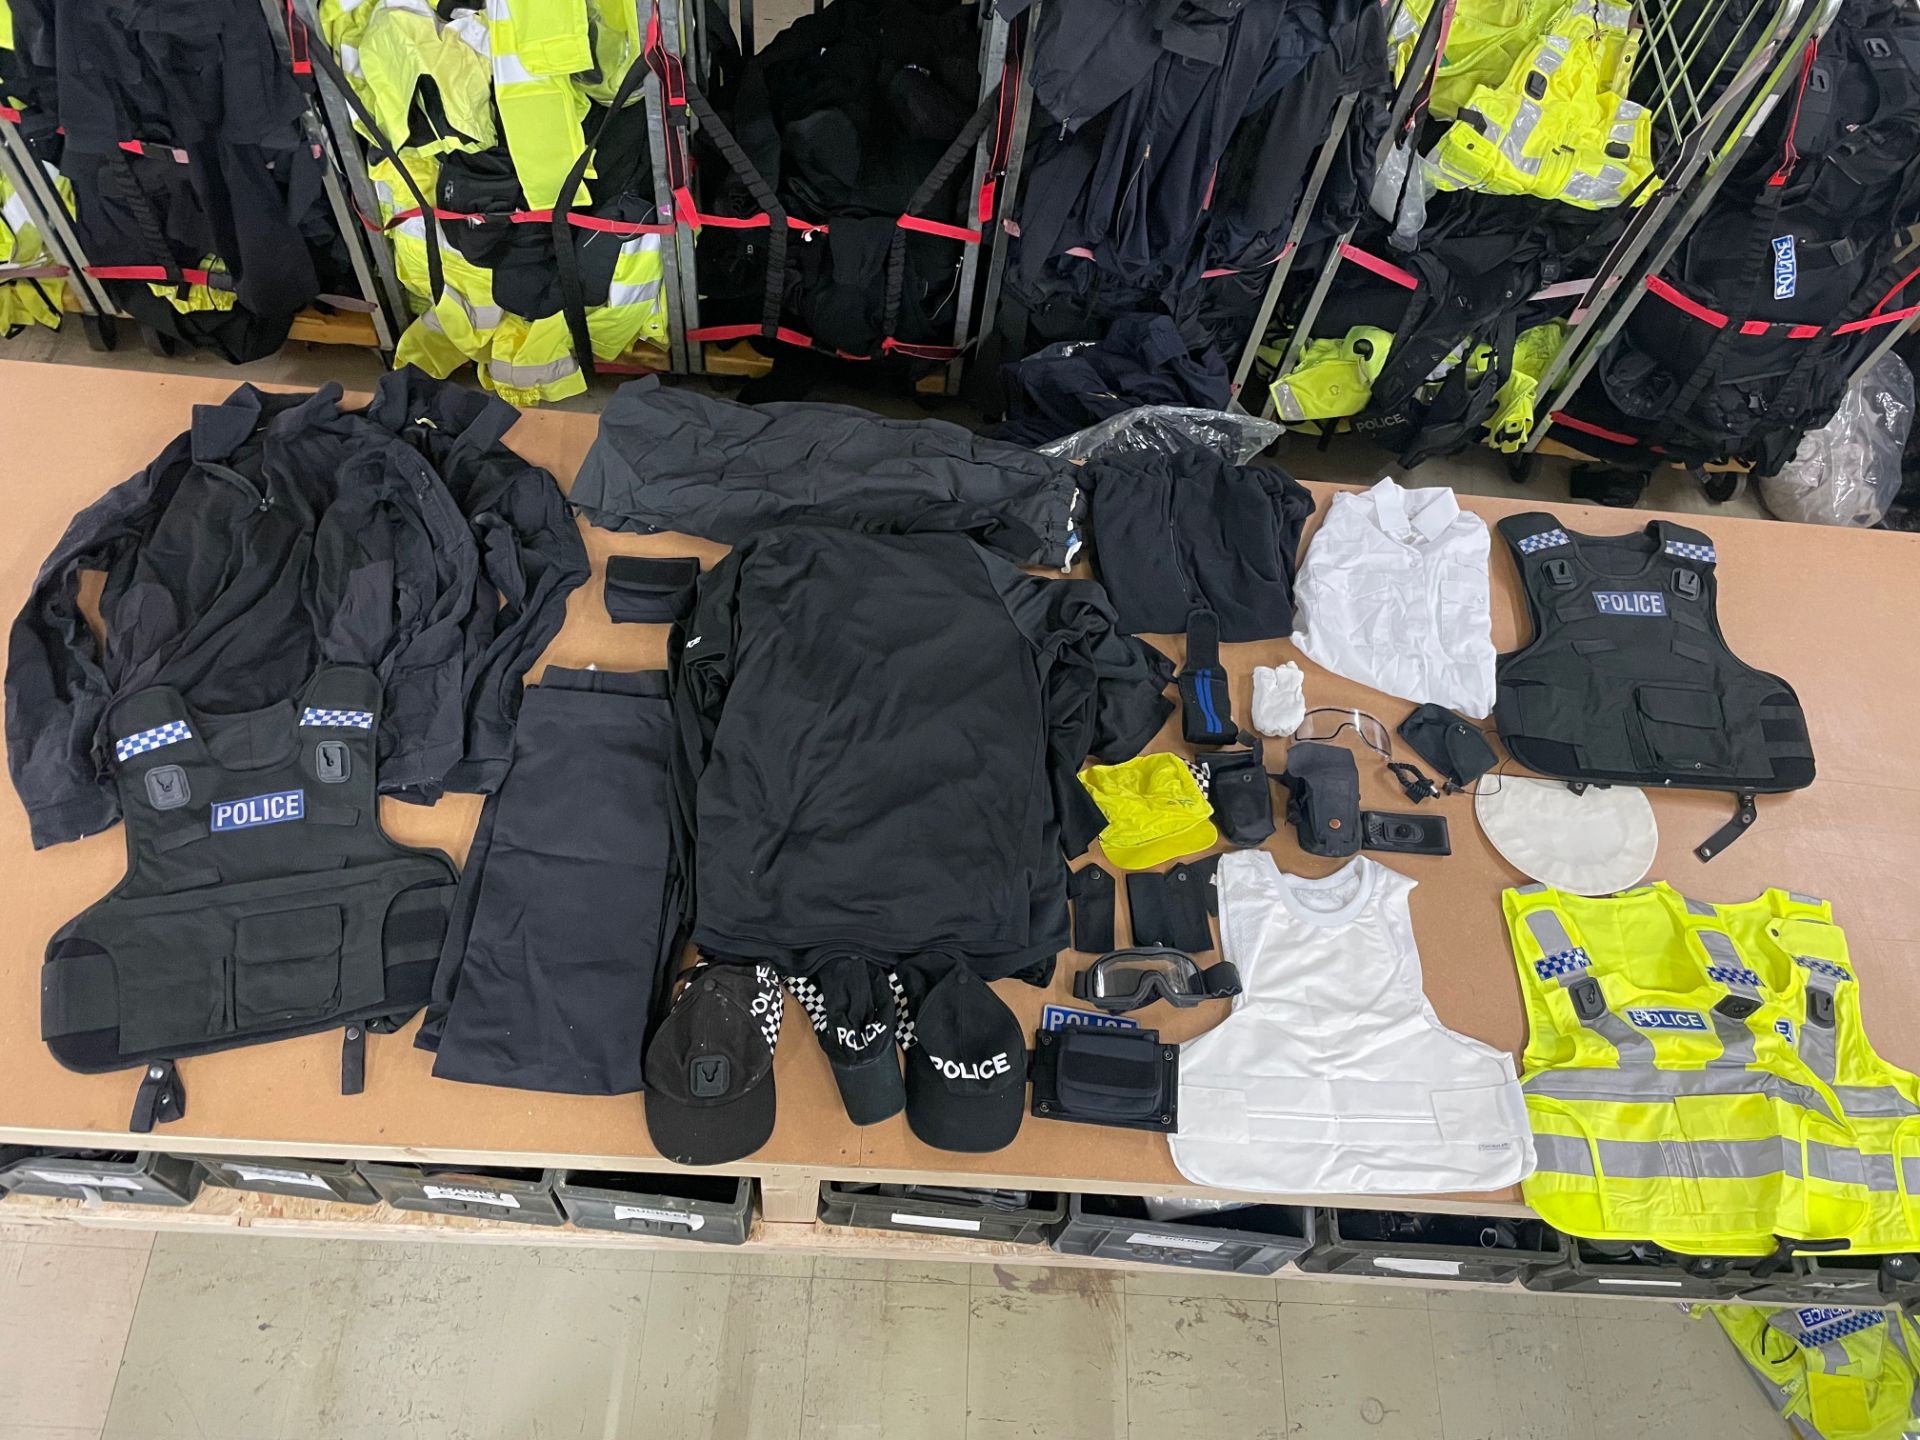 20 X BAGS EX POLICE CLOTHING & ACCESSORIES - RRP £5500.00 - Image 9 of 12